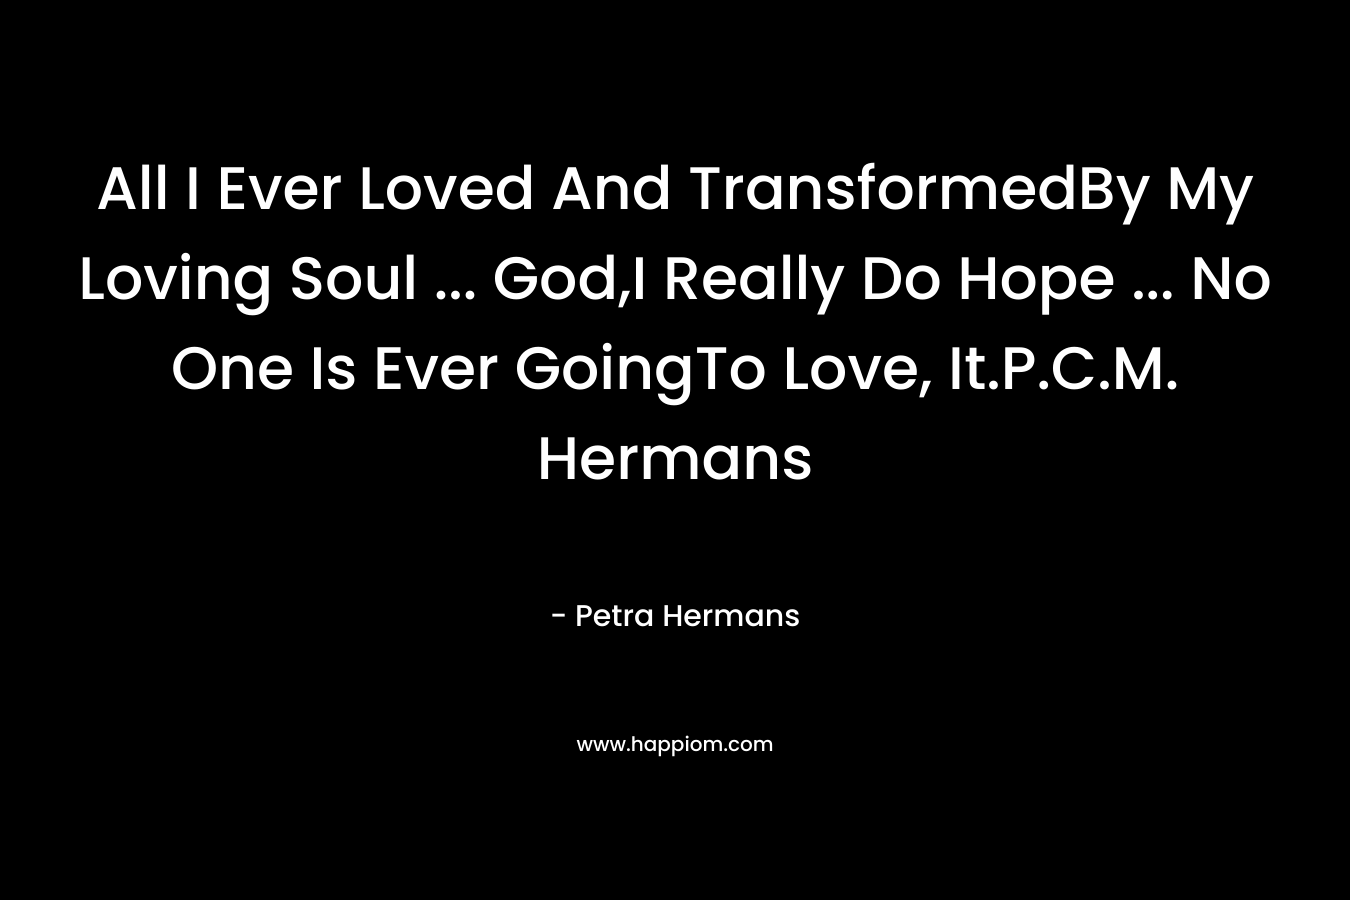 All I Ever Loved And TransformedBy My Loving Soul … God,I Really Do Hope … No One Is Ever GoingTo Love, It.P.C.M. Hermans – Petra Hermans